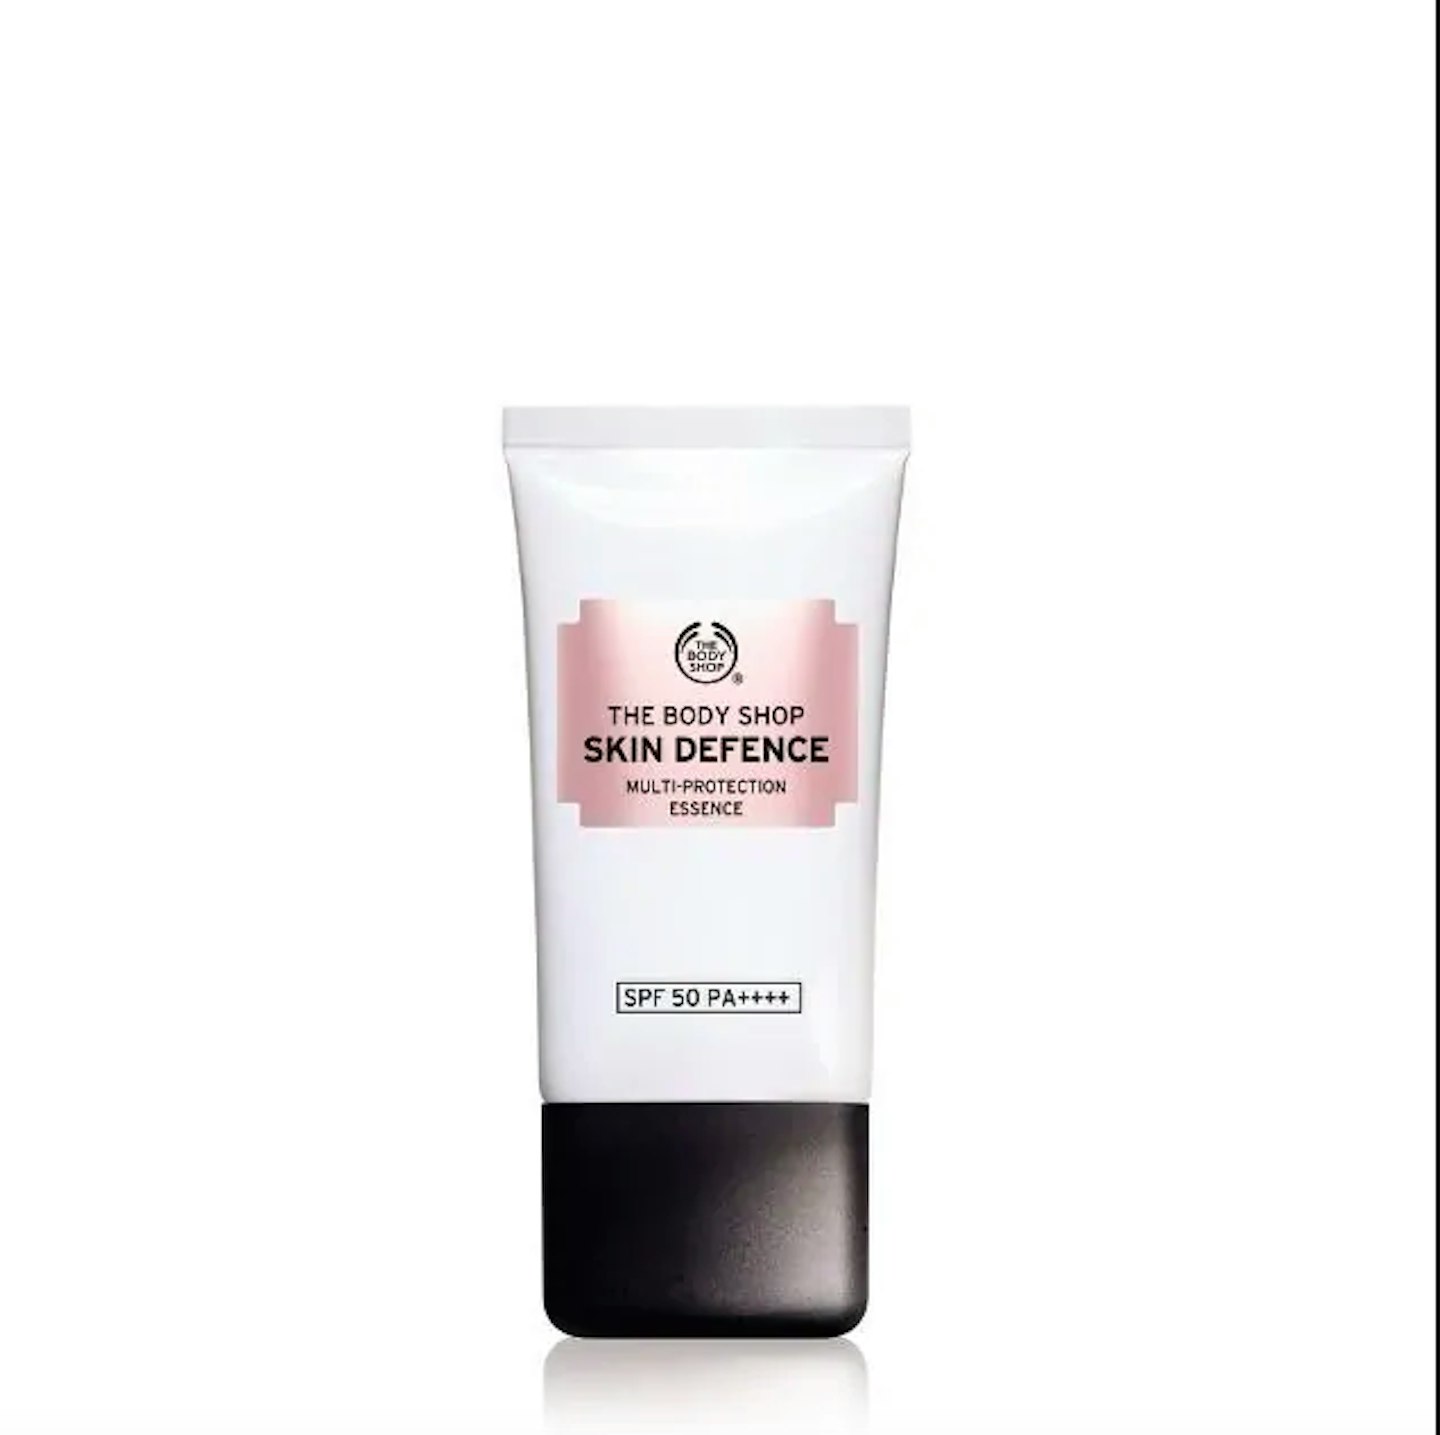 The Body Shop, Skin defence Multi-Protection Essence SPF50, £17